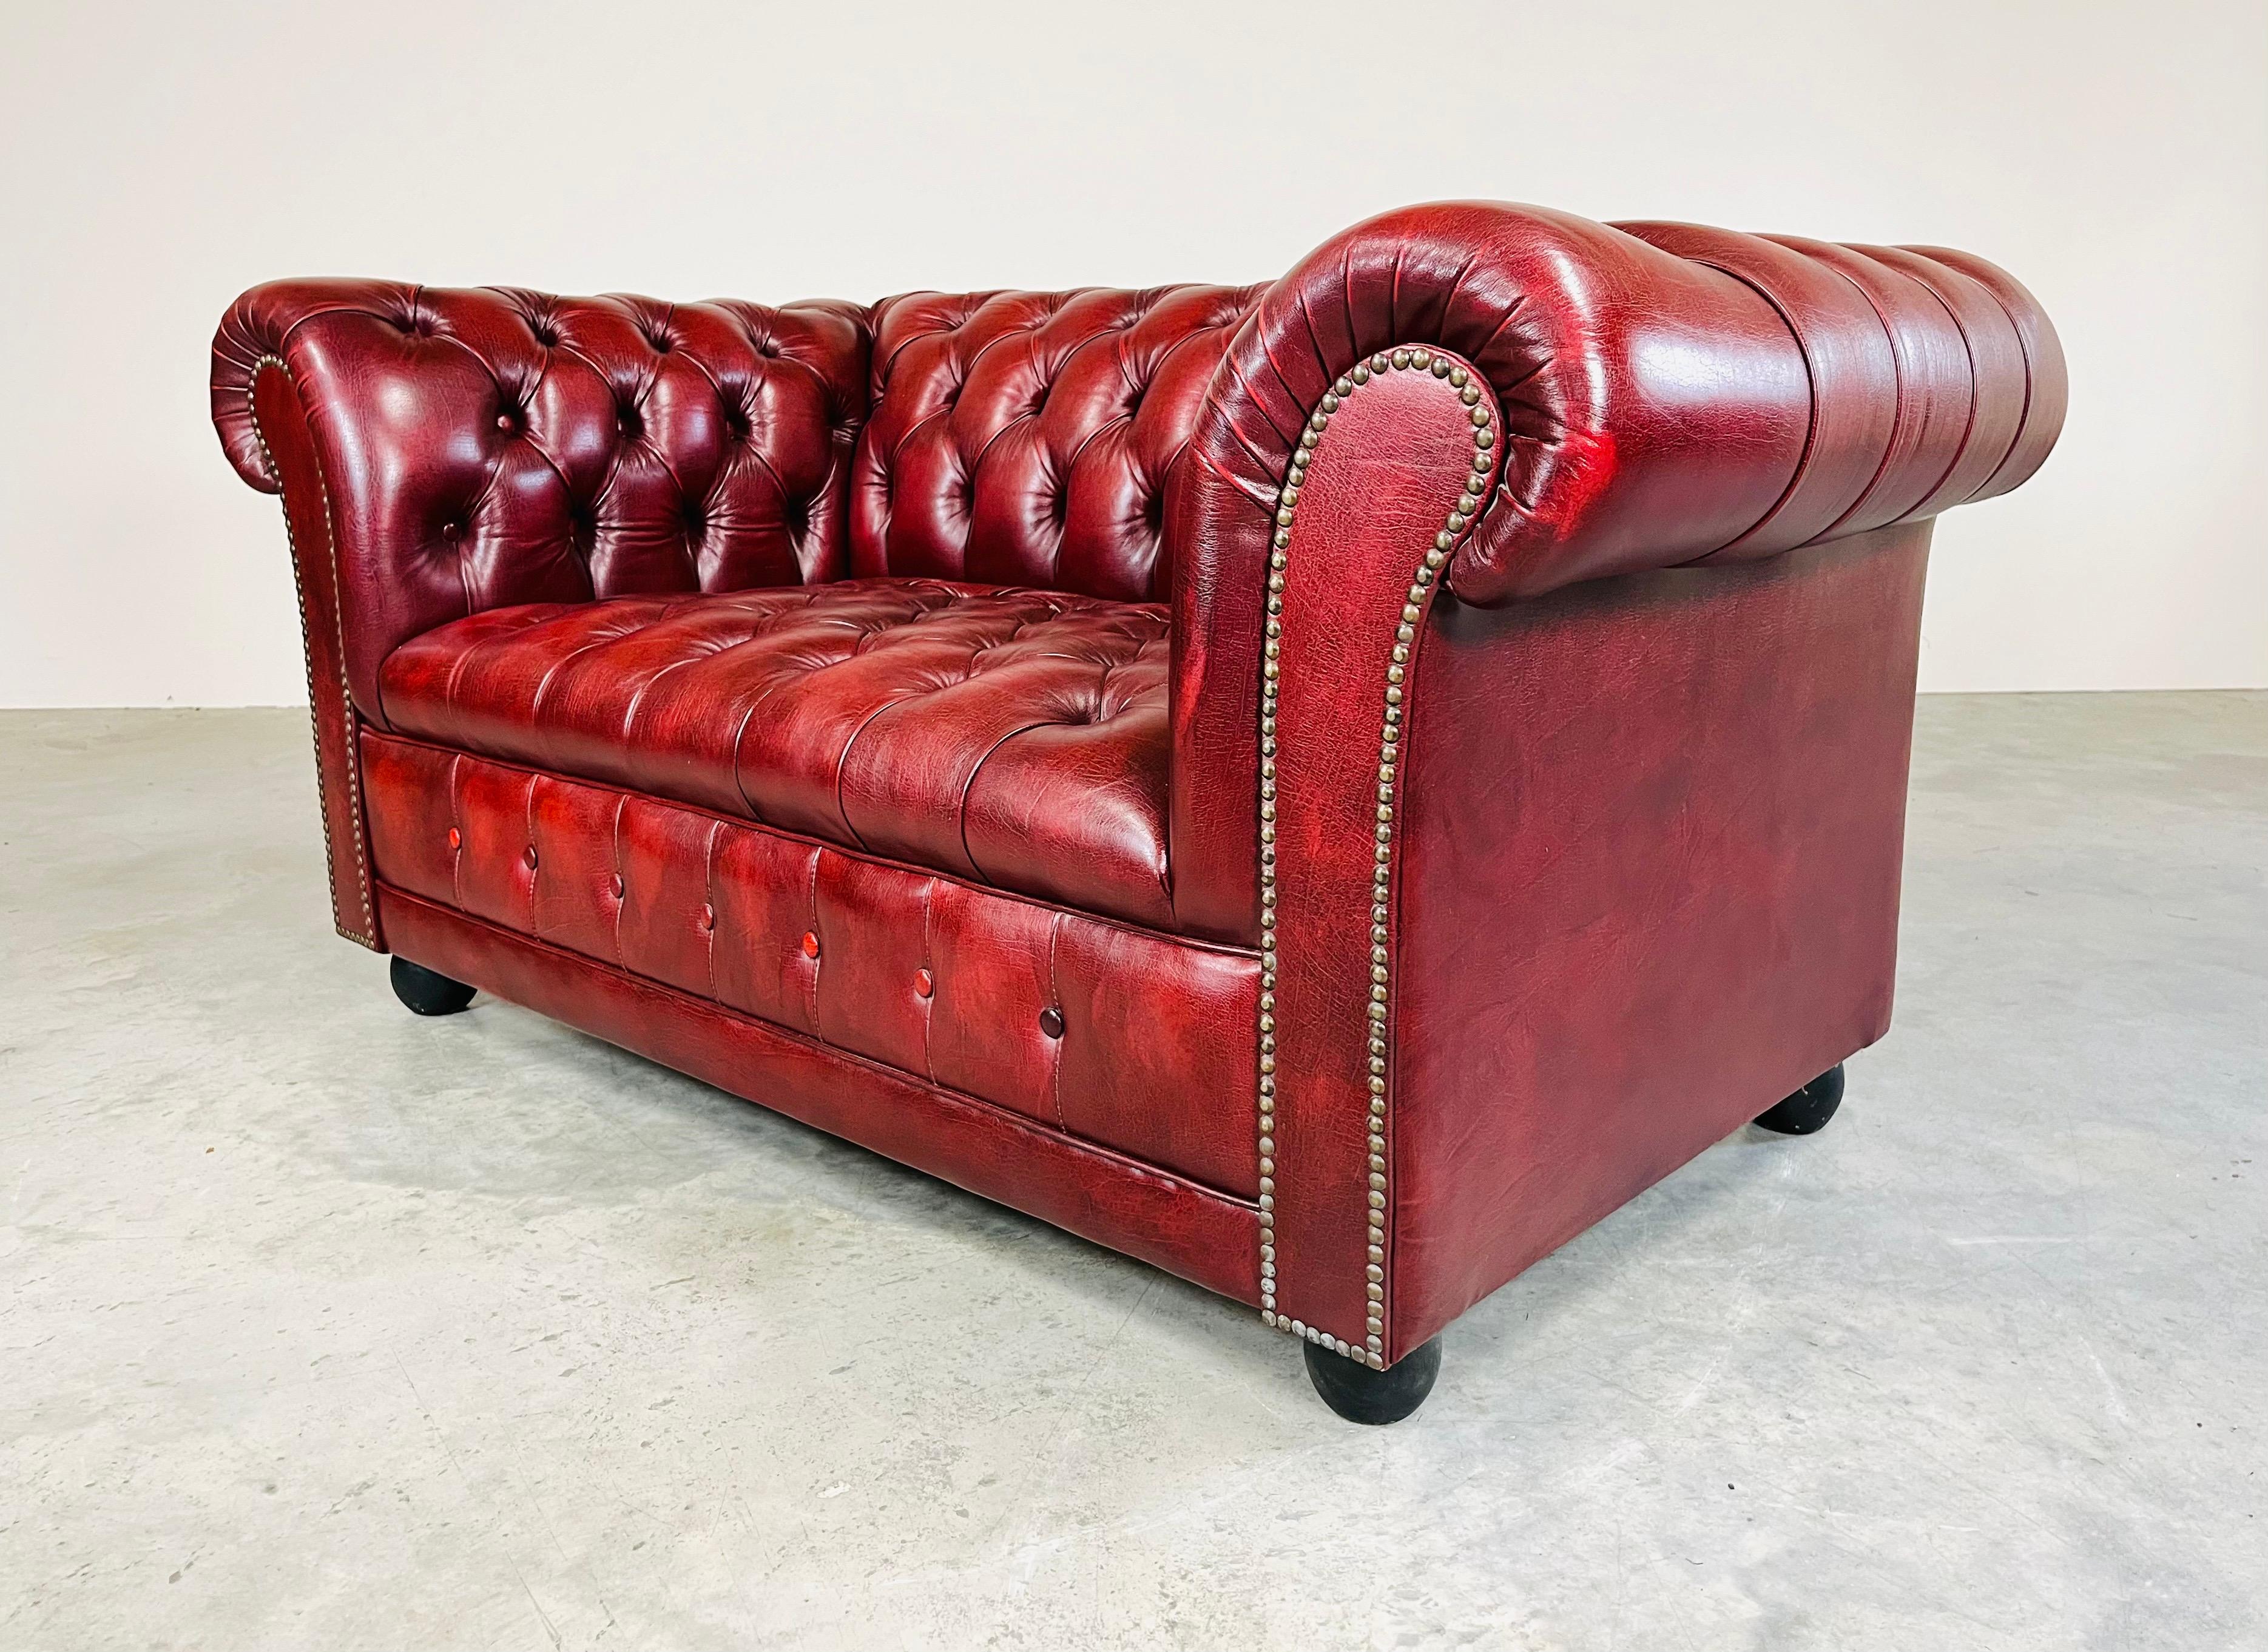 Oxblood Chesterfield Tufted Leather Love Seat Sofa -Great Britain Circa 1970 4